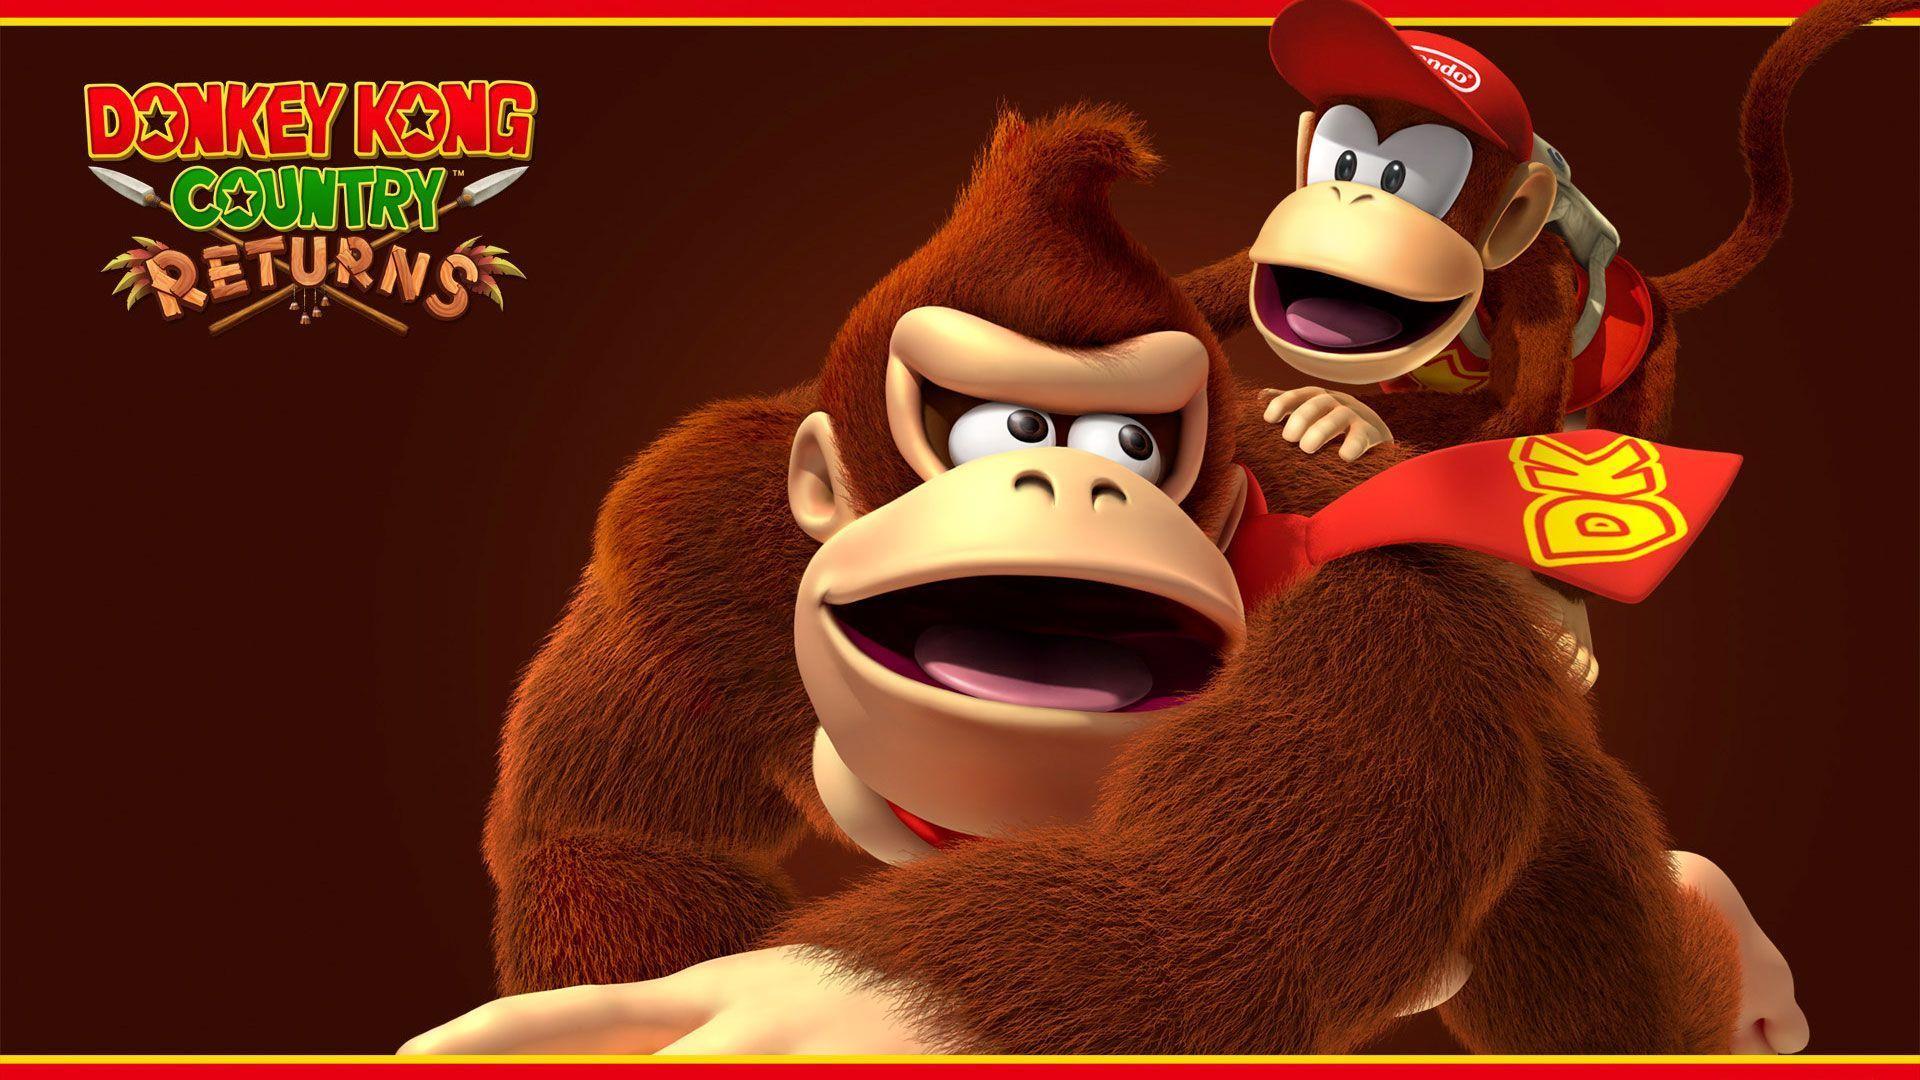 Miraculous Donkey Kong Country Returns Wallpaper in HD